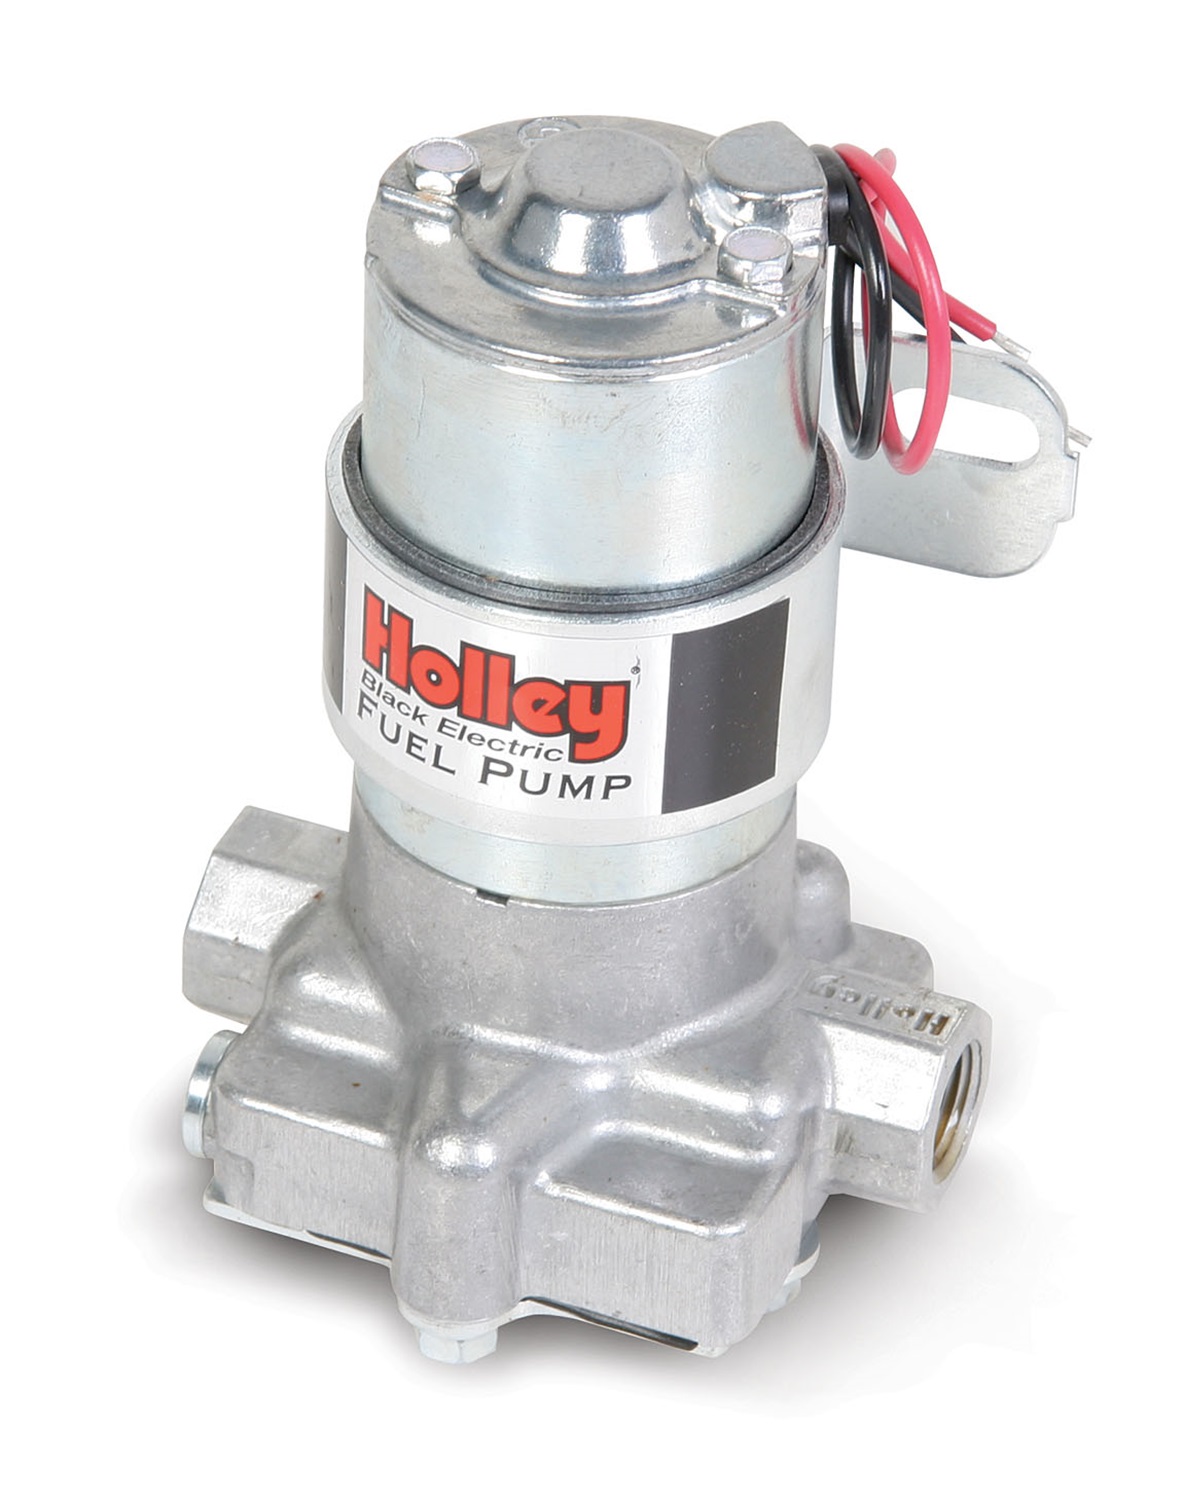 Holley Performance Holley Performance 12-815-1 Electric Fuel Pump